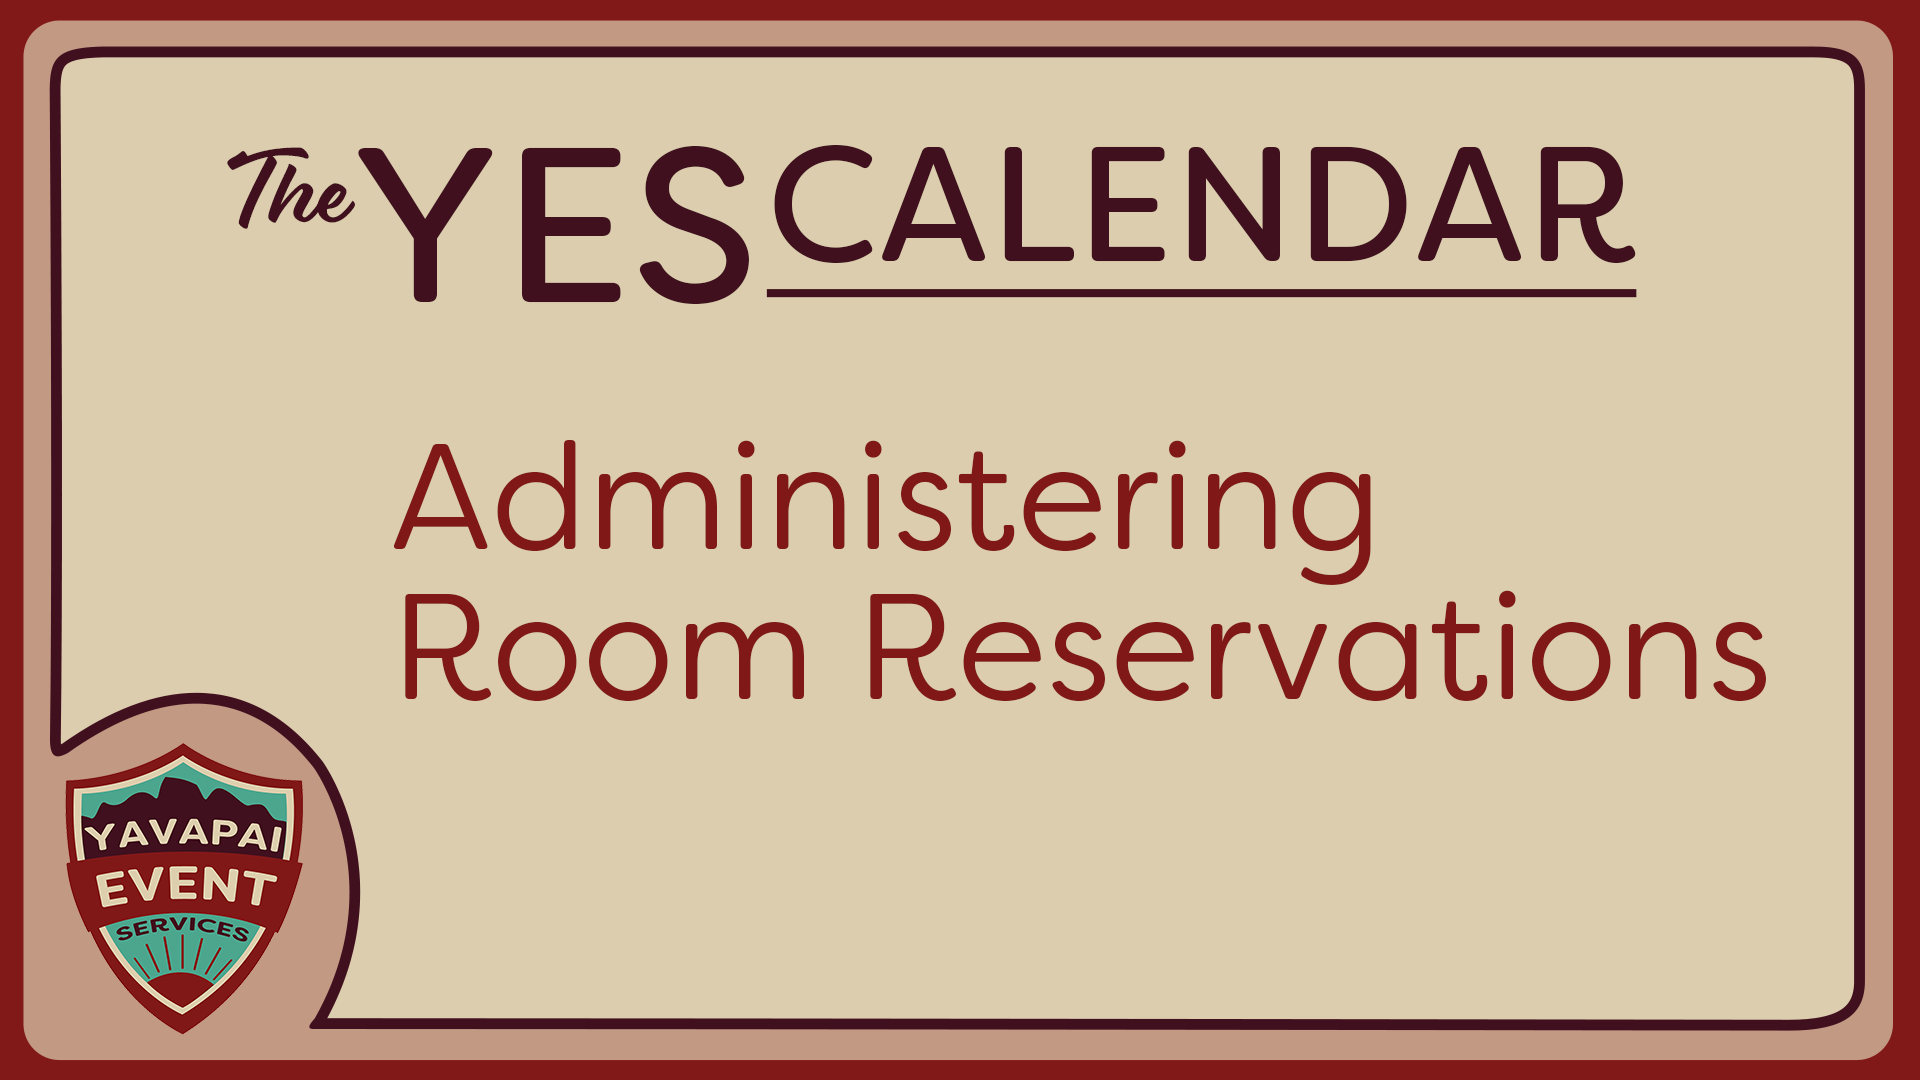 Administering Room Reservations